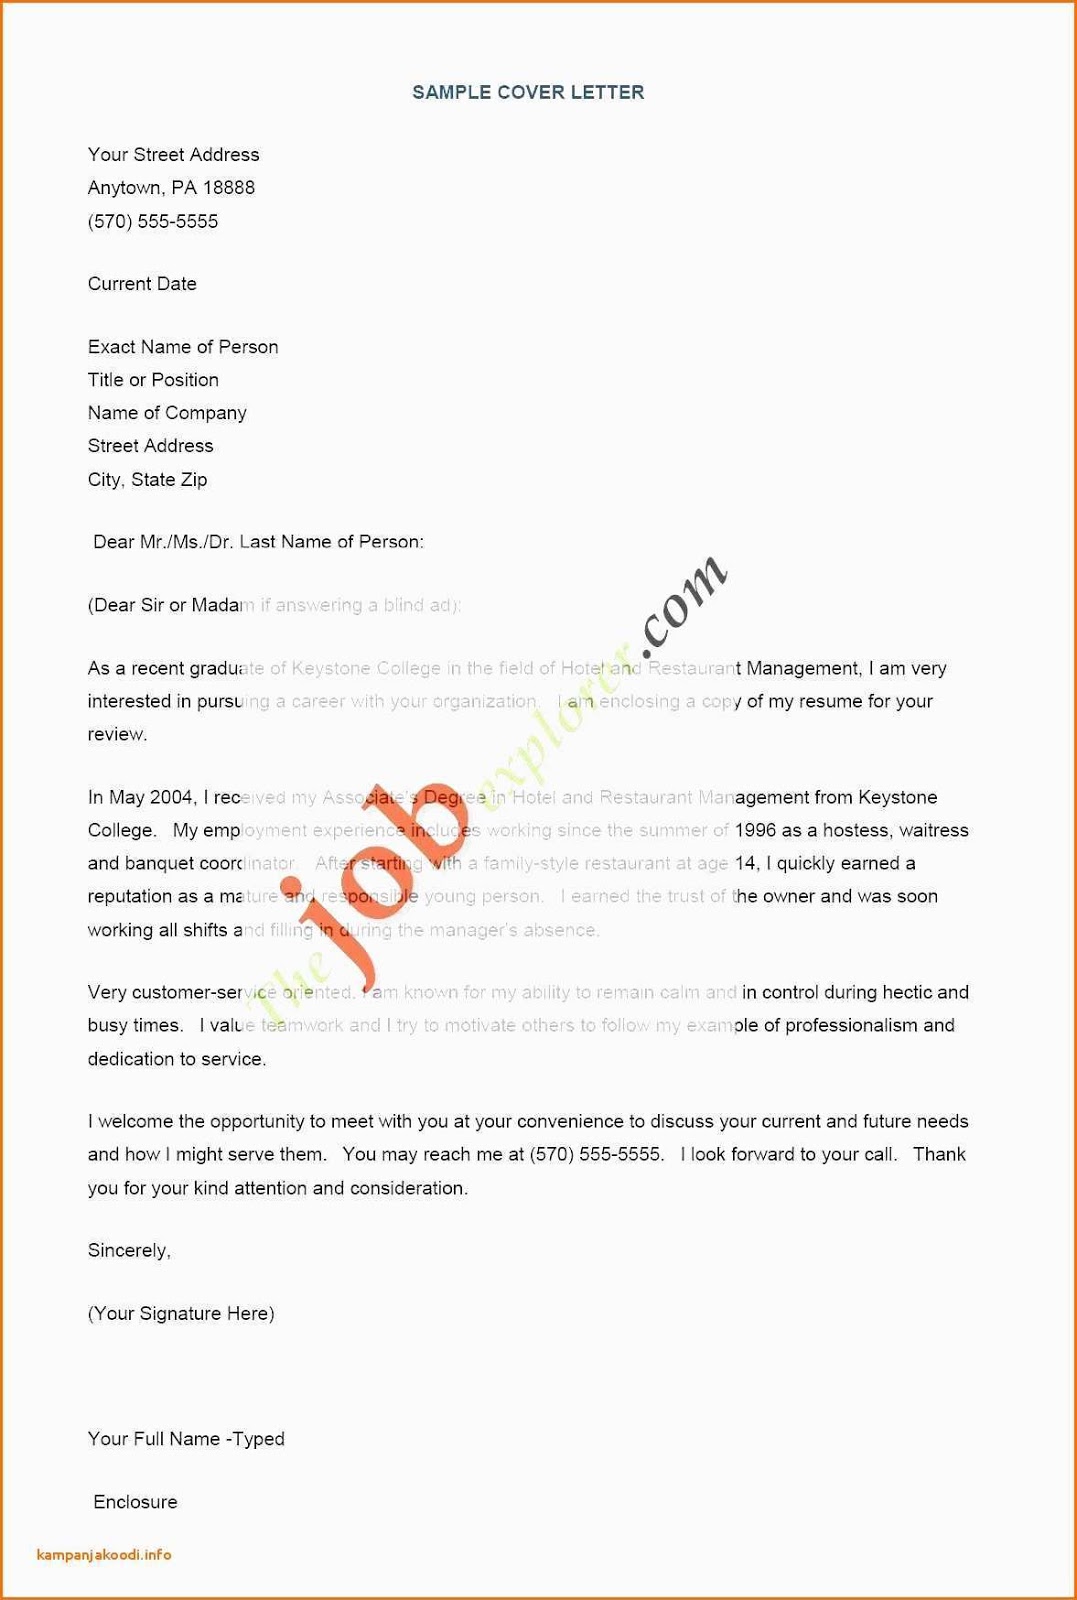 name of resume file 2019 name of resume examples name of resume meaning 2020 name of resume means name of resume font name of resume paper name of employer resume name in header of resume other name of resume different name of resume similar name of resume latest name of resume alternate name of resume hindi name of resume good